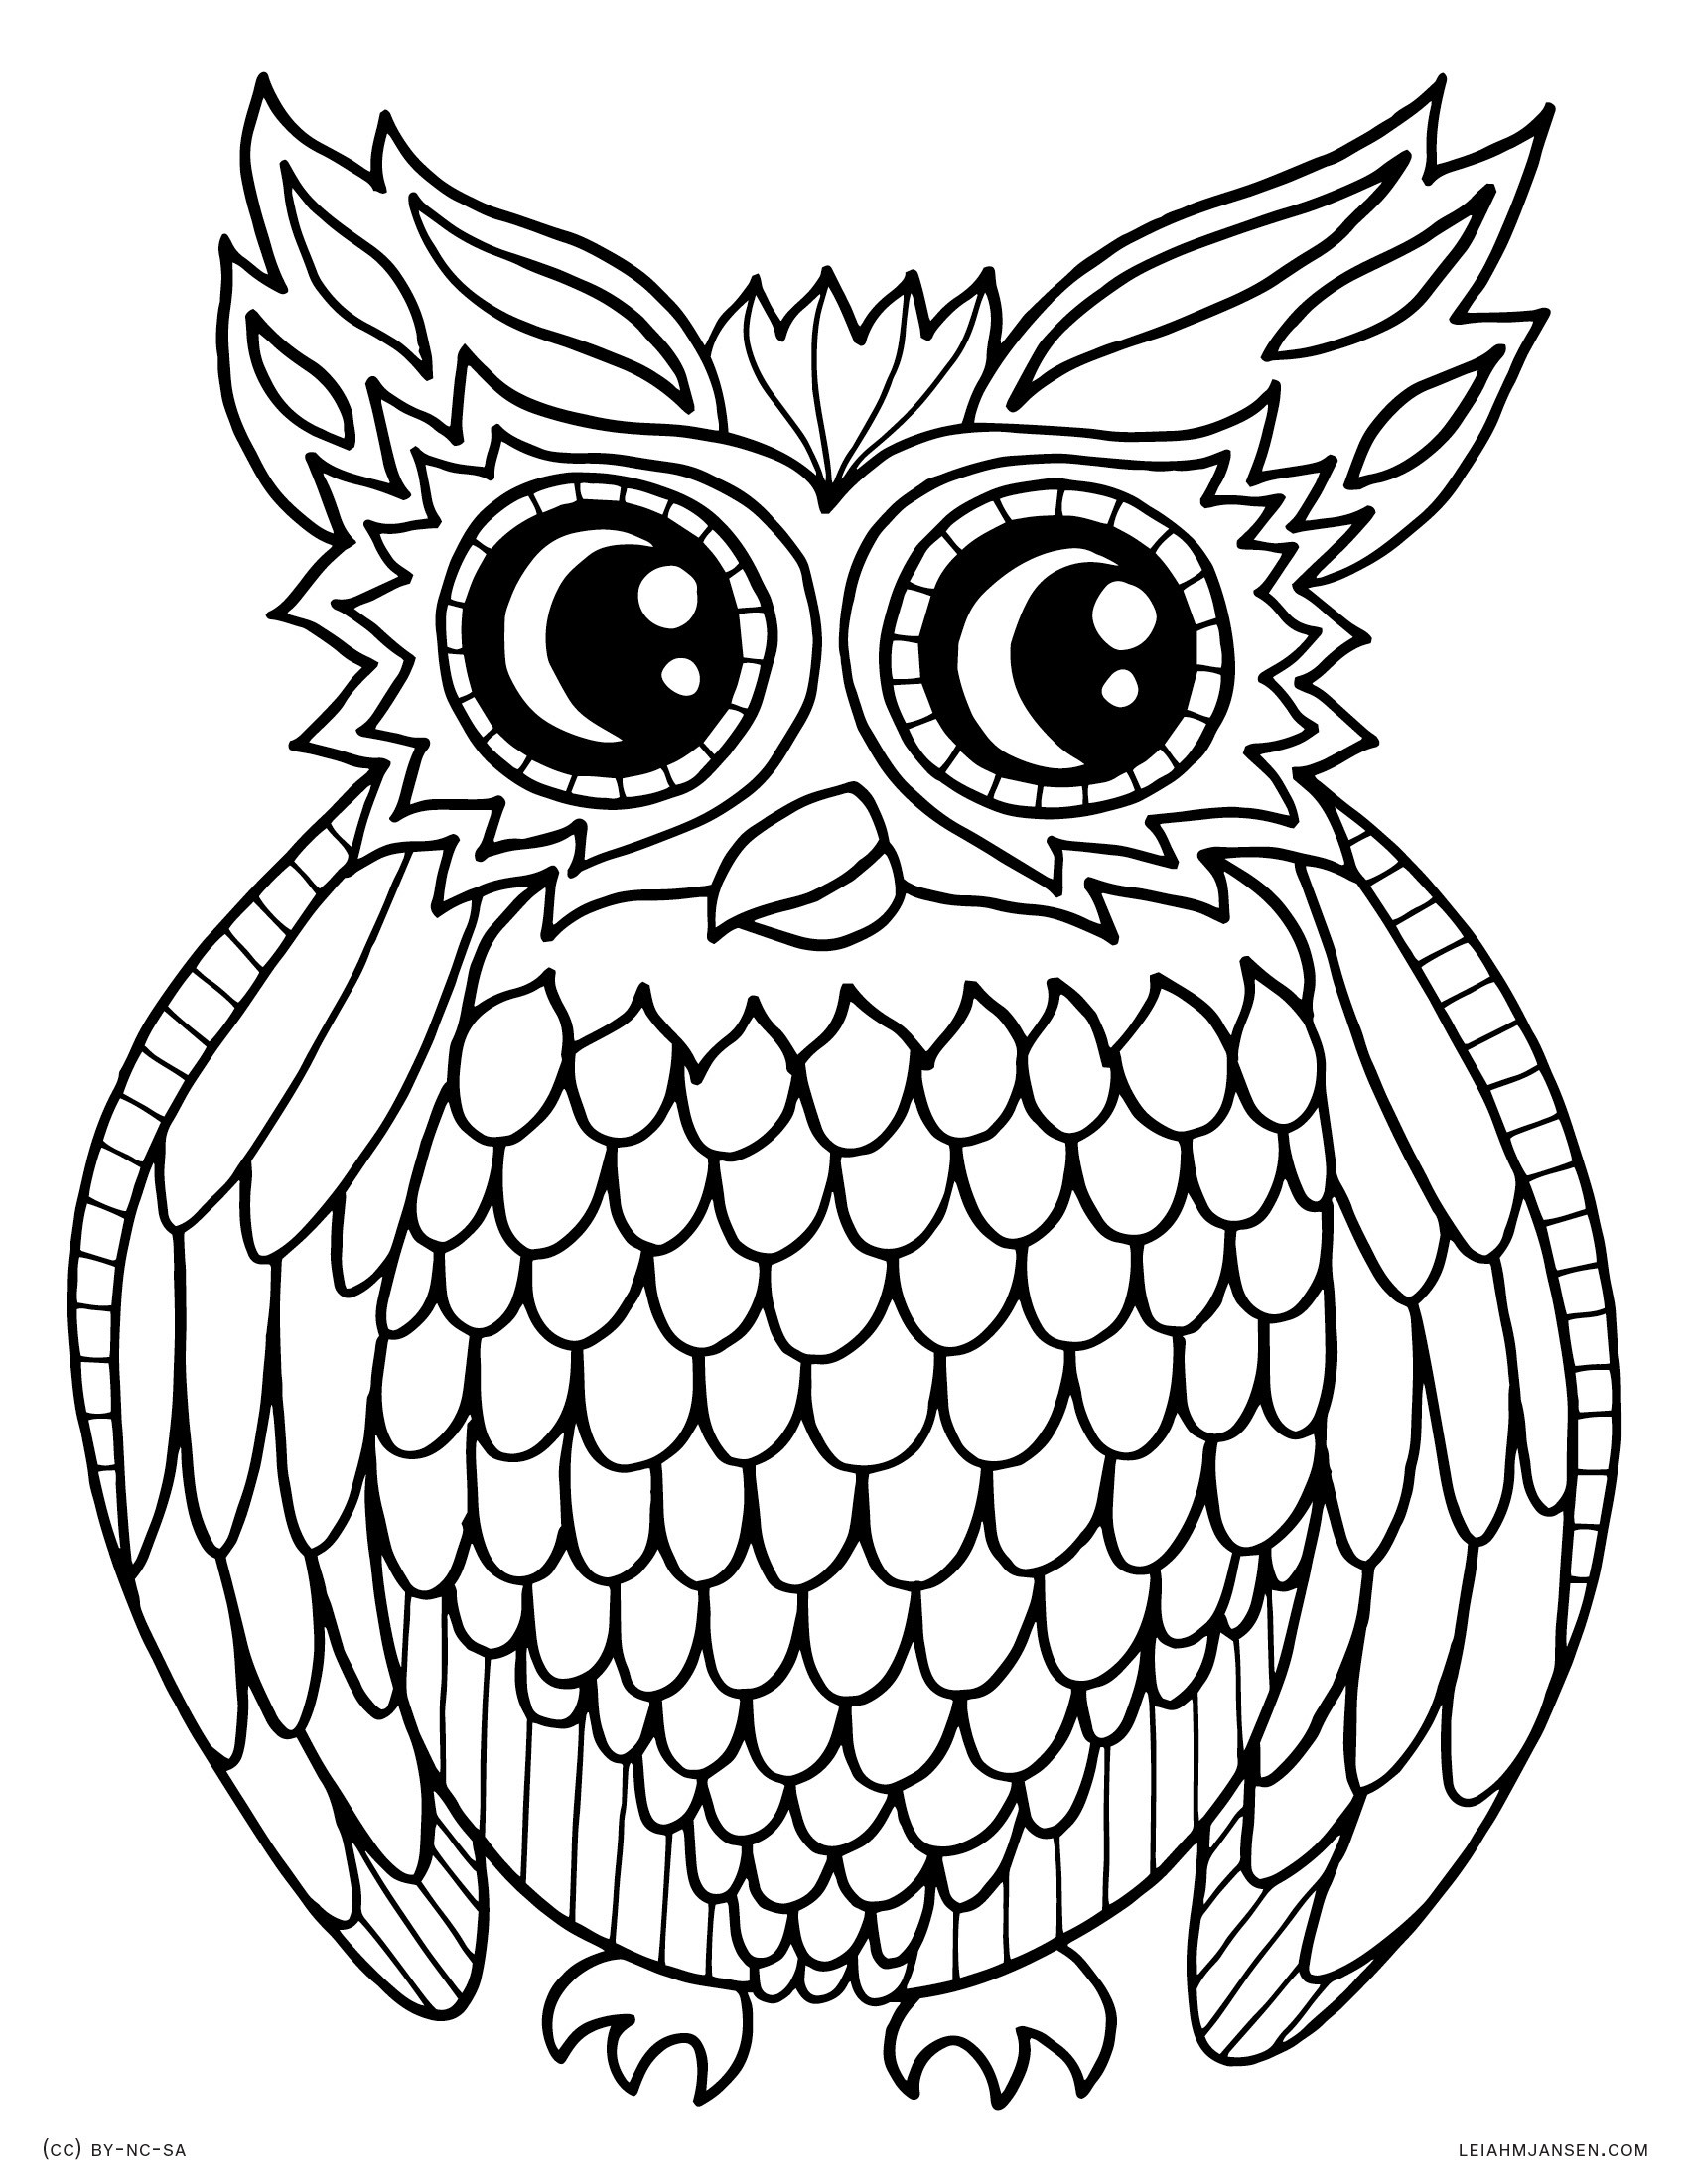 Free Printable Owl Coloring Pages
 Coloring Pages